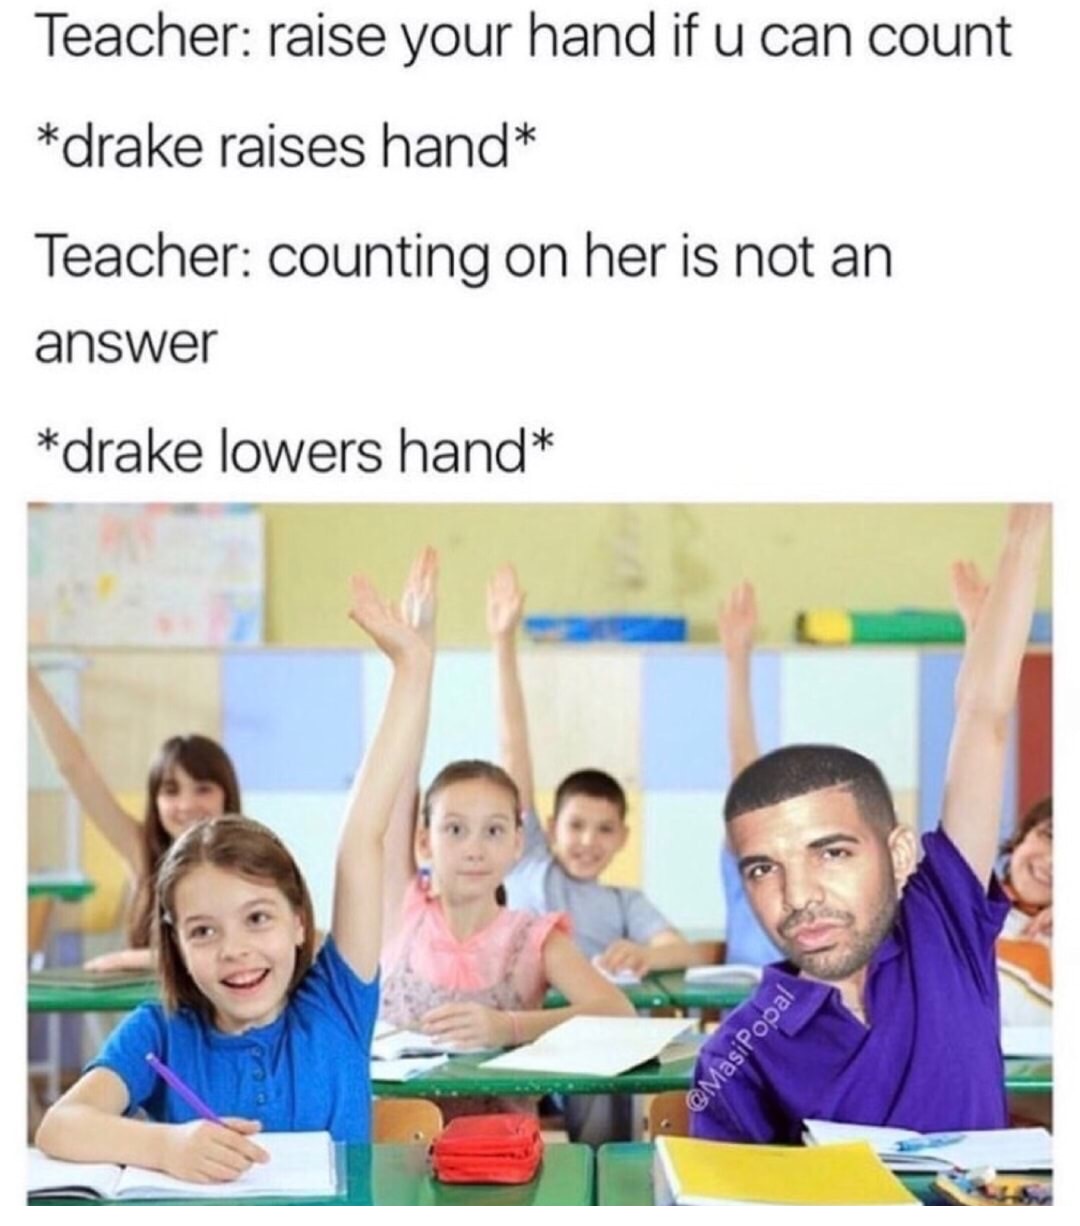 boys and girls in class - Teacher raise your hand if u can count drake raises hand Teacher counting on her is not an answer drake lowers hand